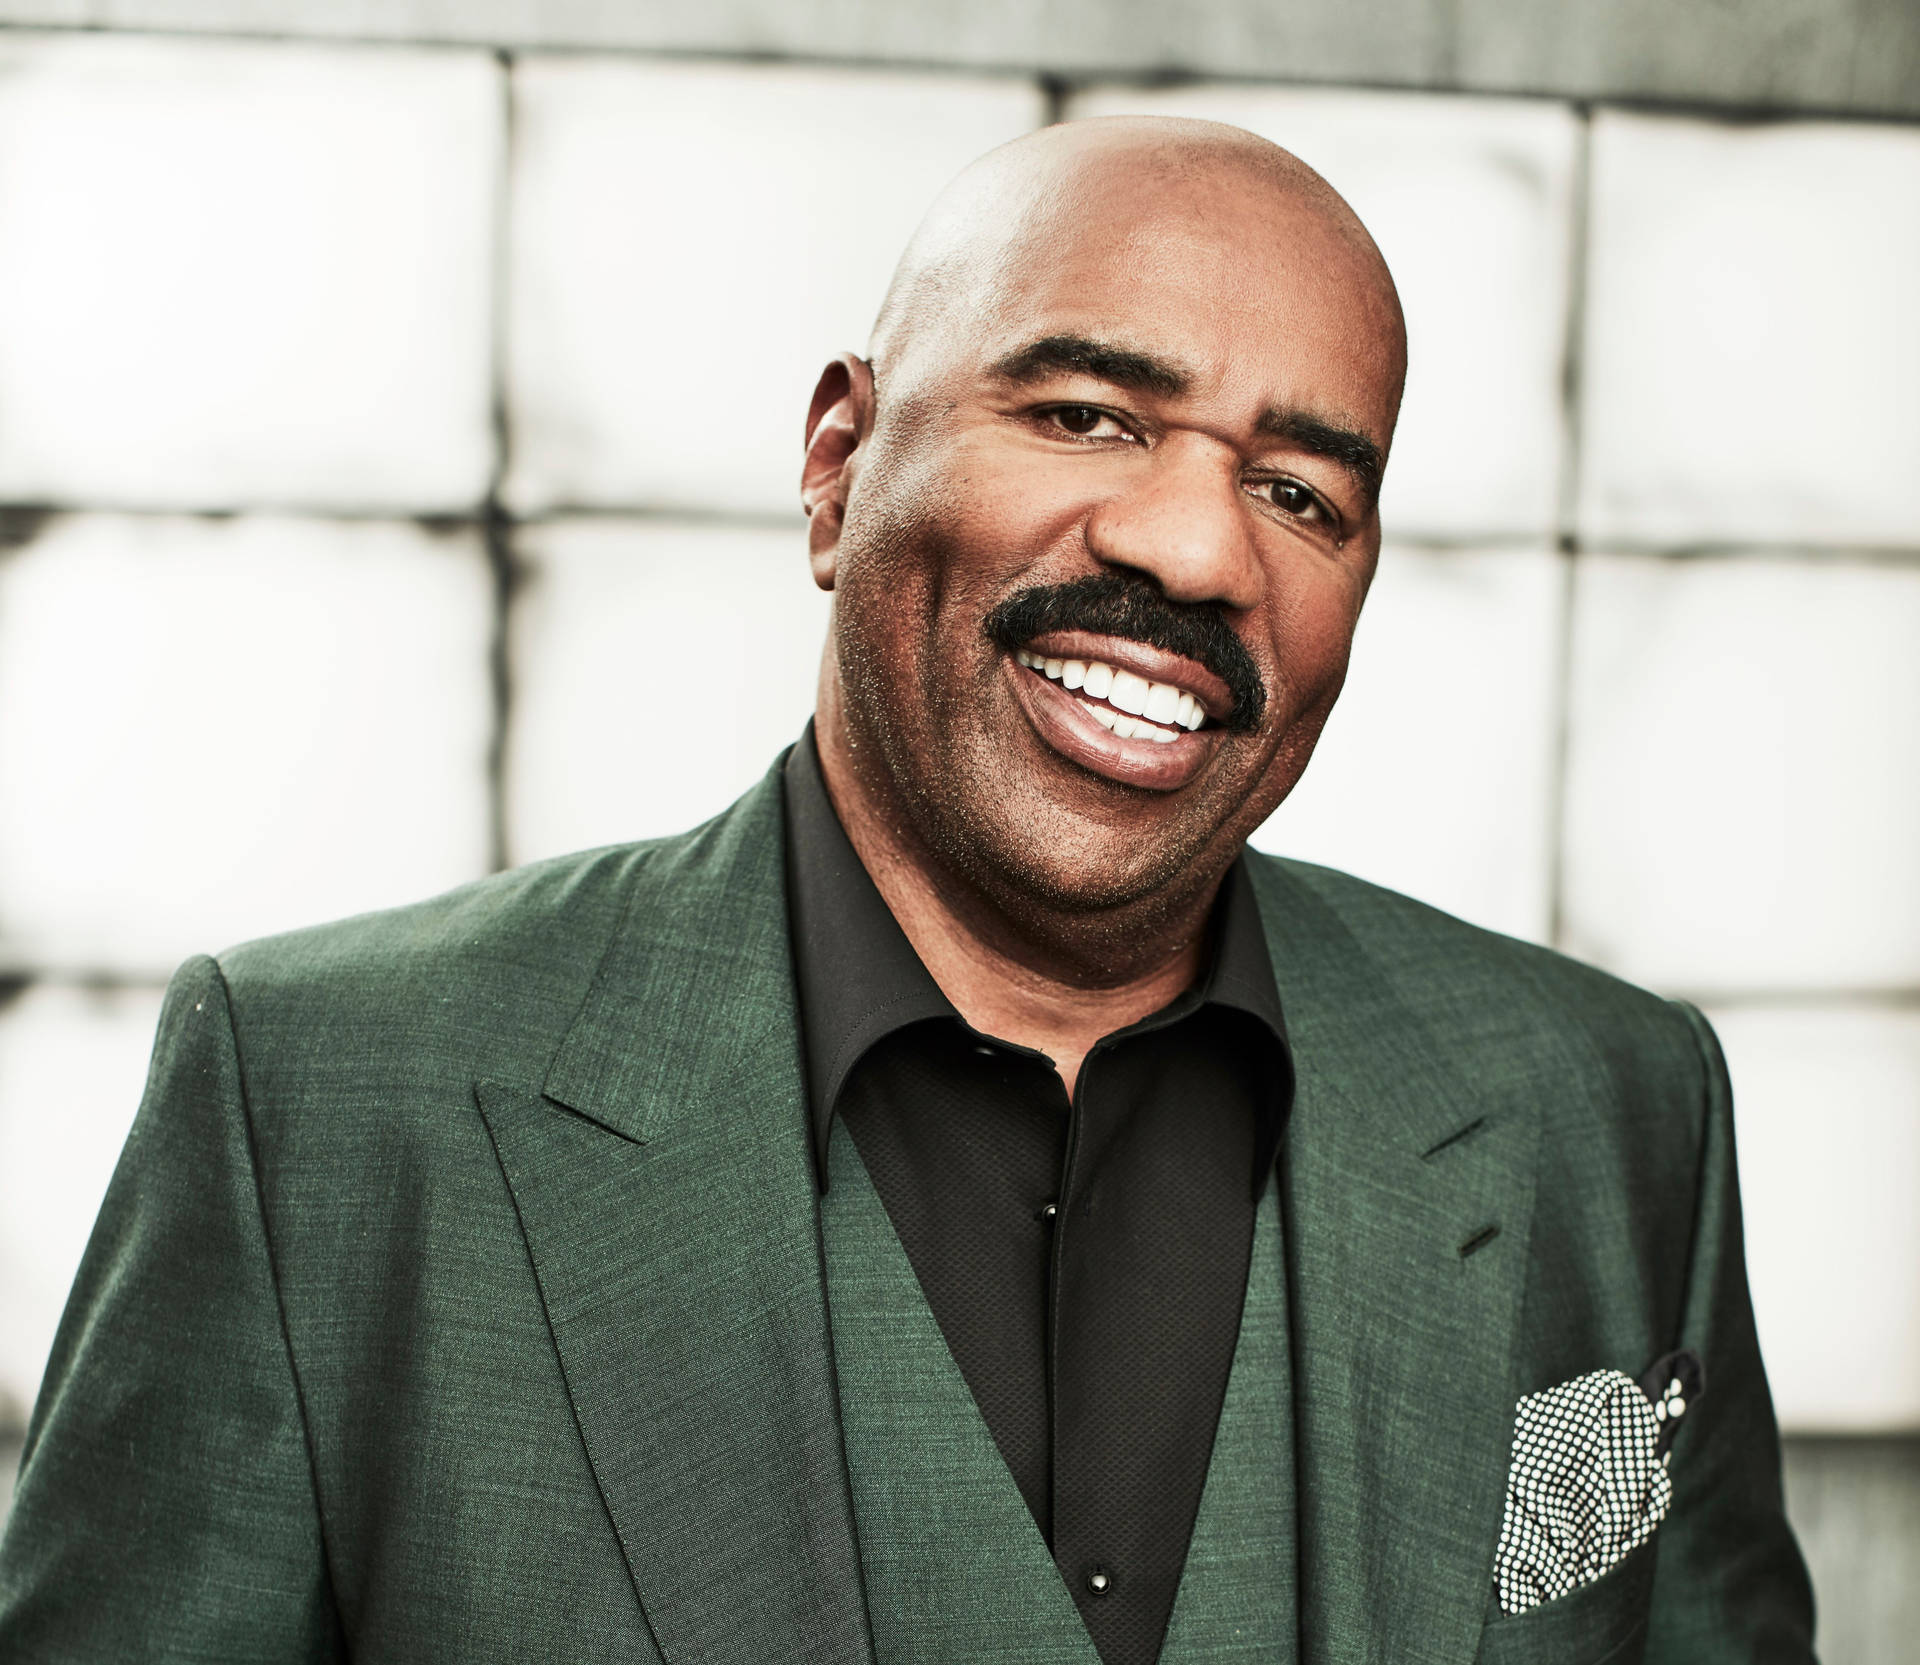 Steve Harvey With Black And Green Suit Background